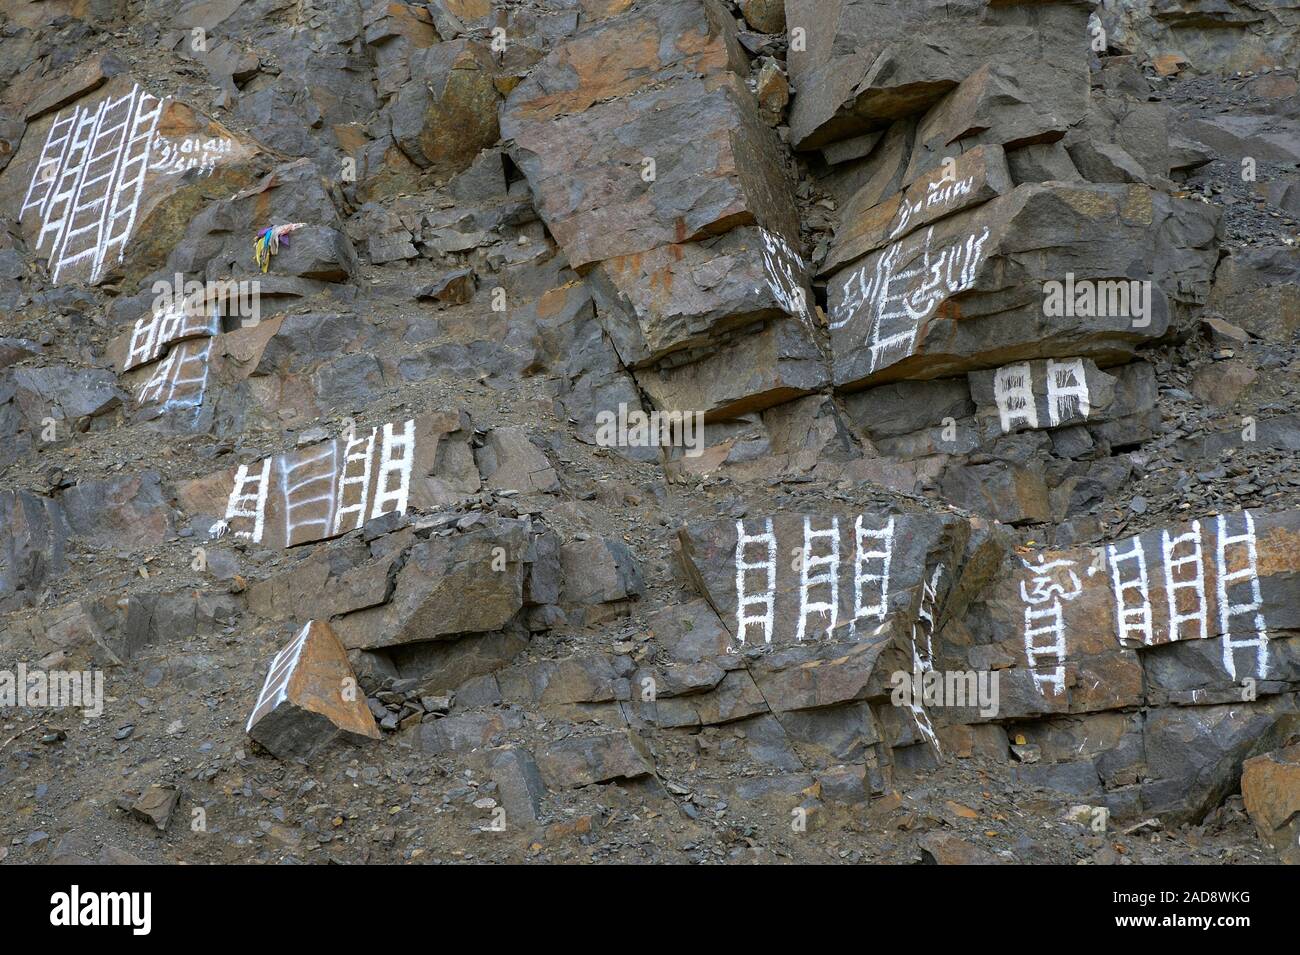 Why Tibetans Paint Ladder on Rock 